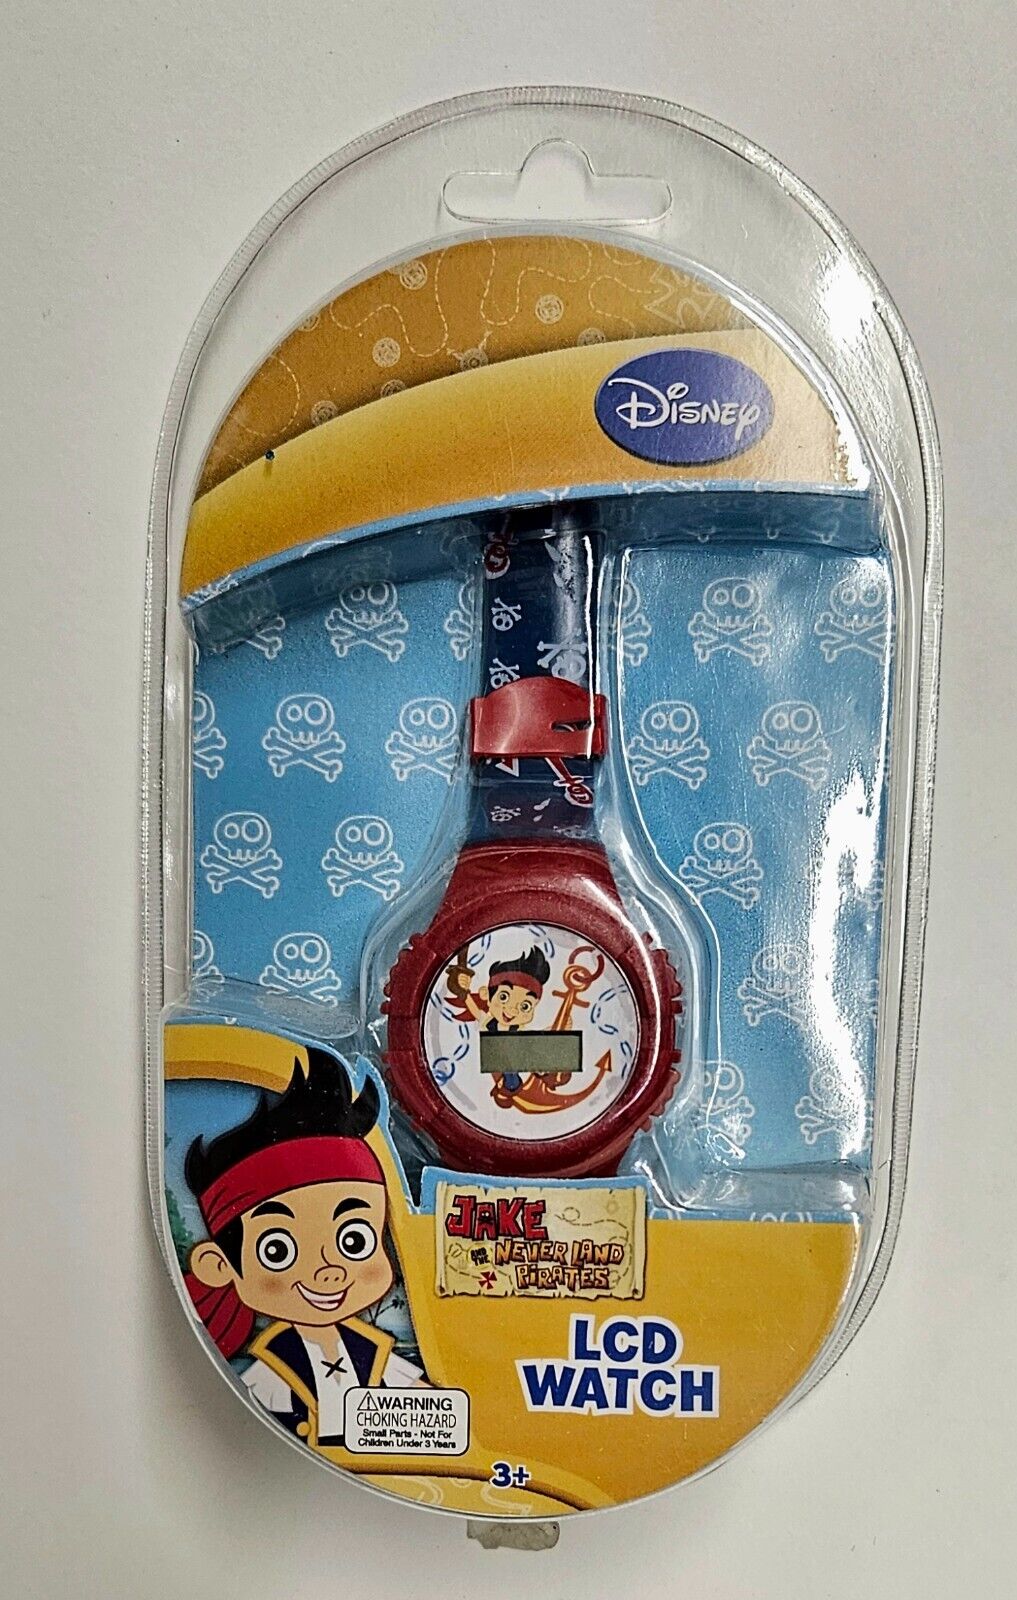 New in package Disney kids Jake and the Neverland Pirates LCD watch